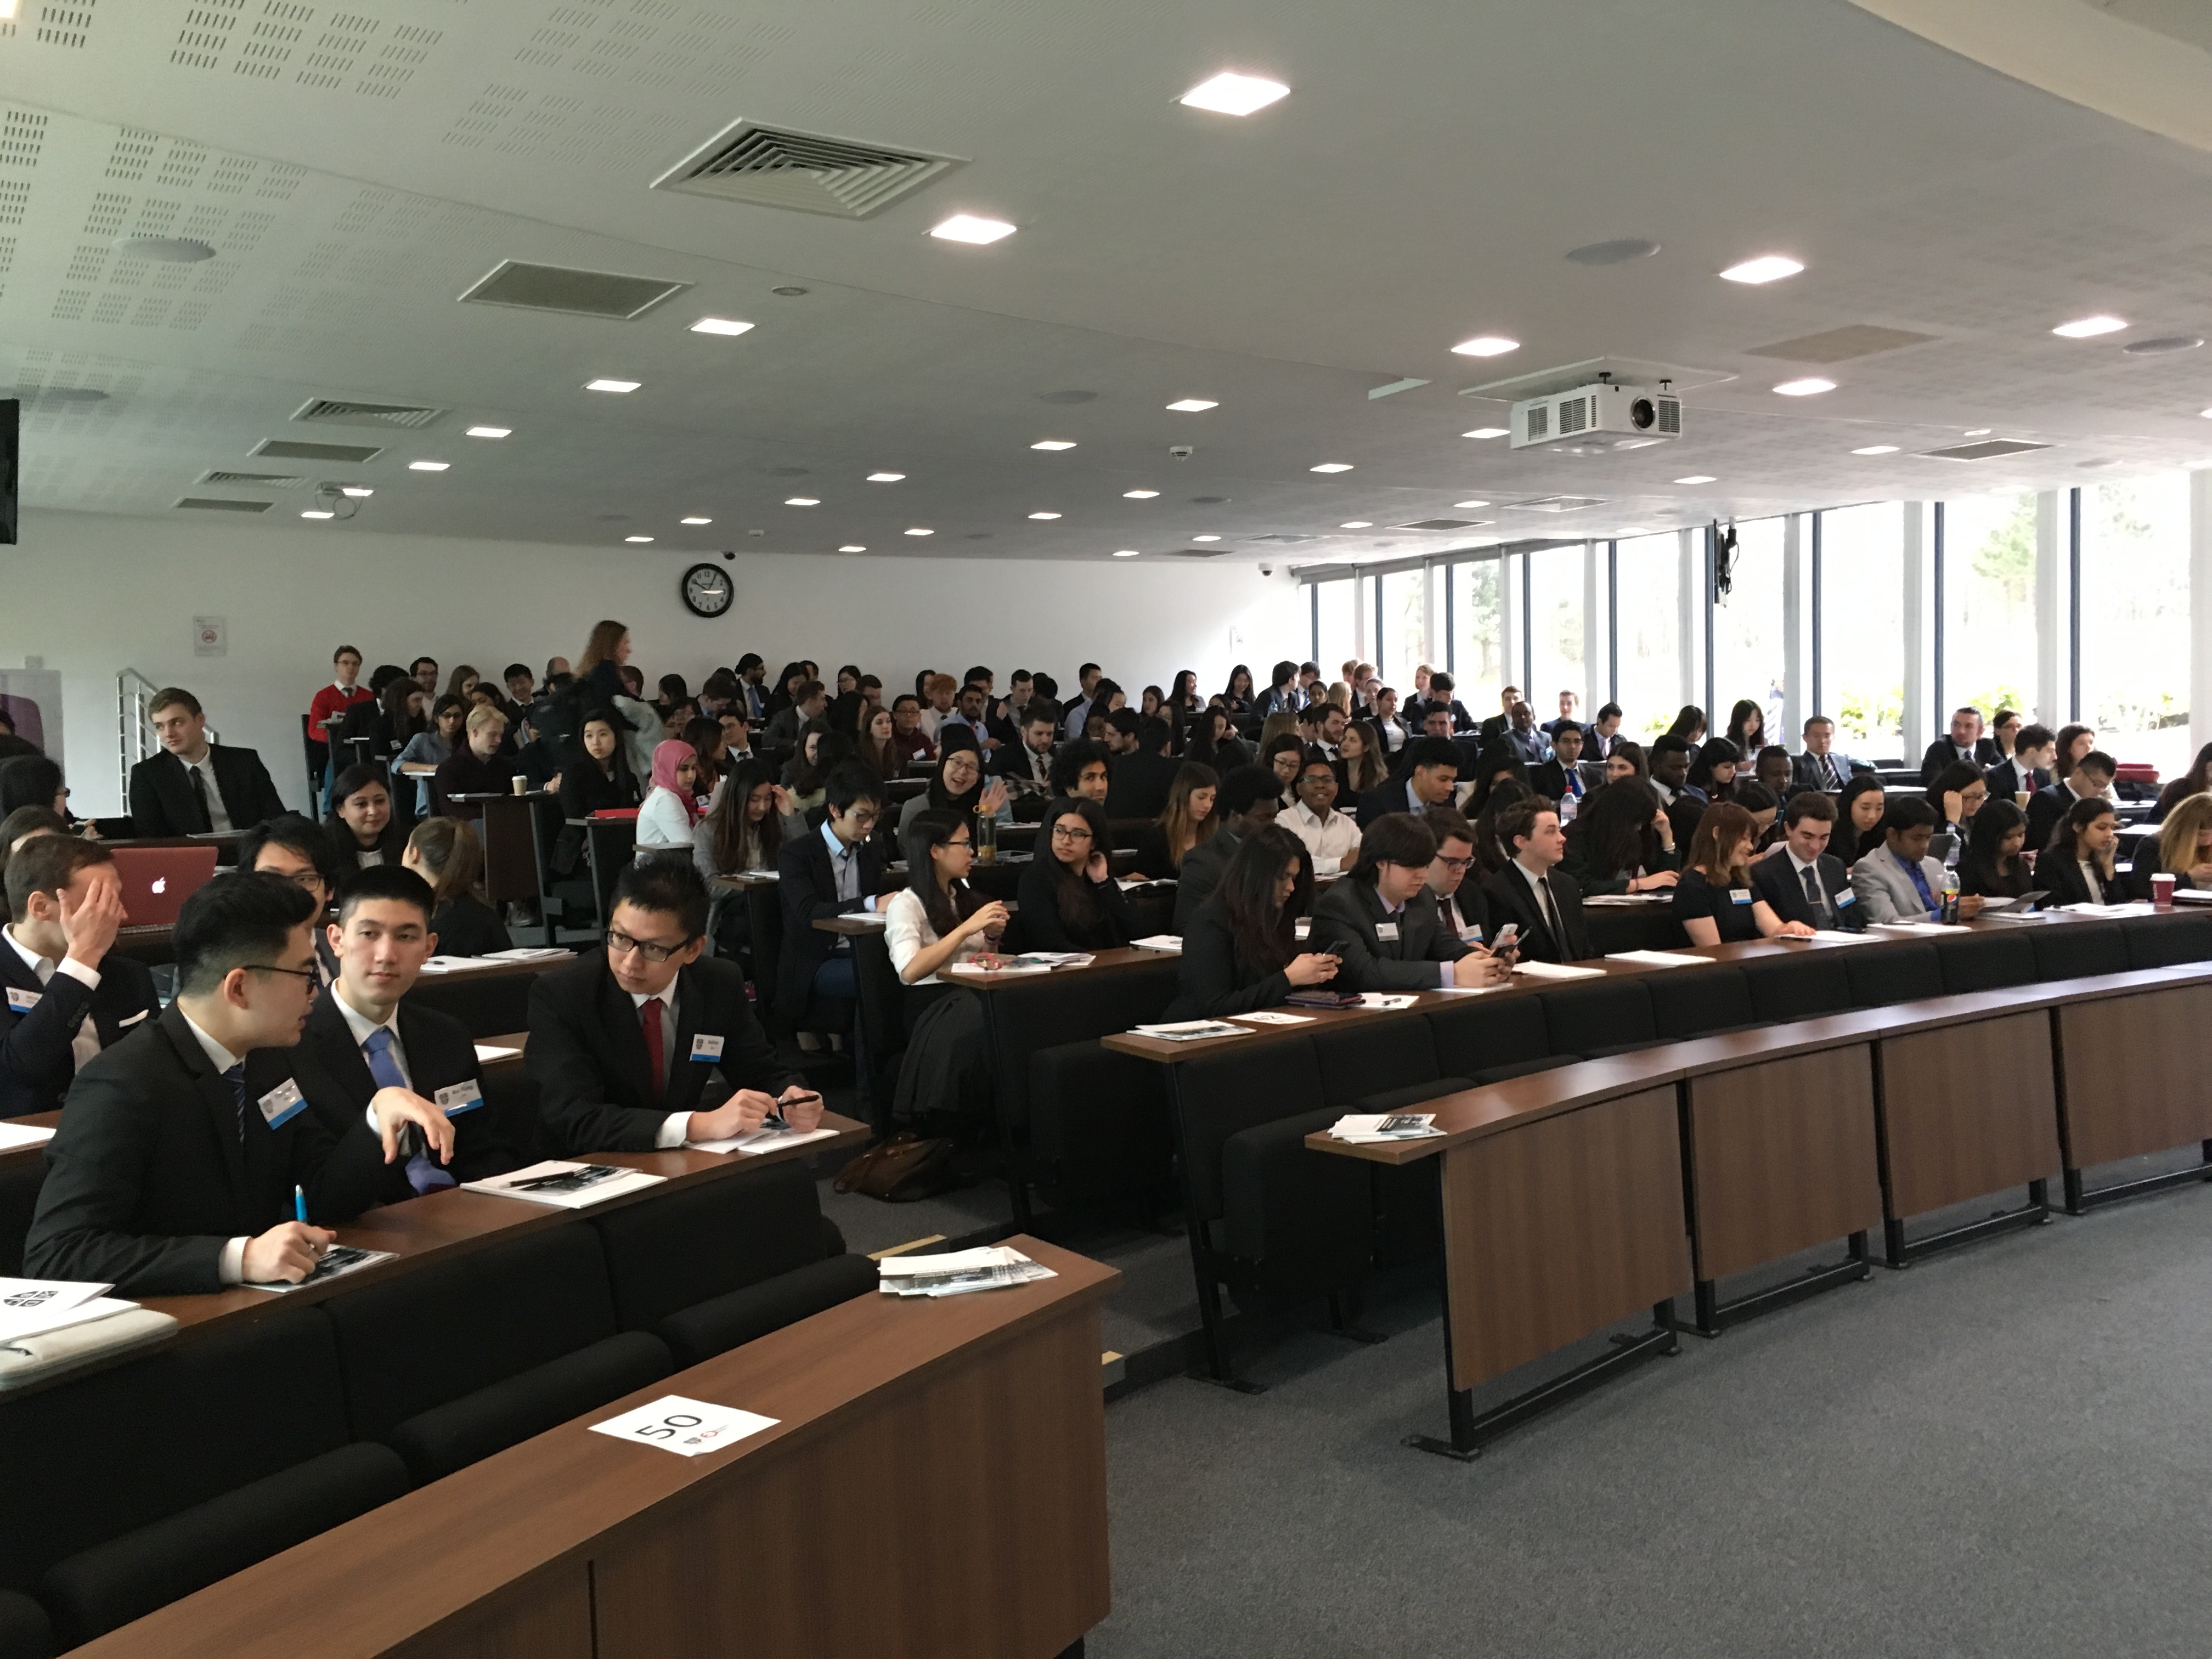 Here we go: delegates awaiting their first task